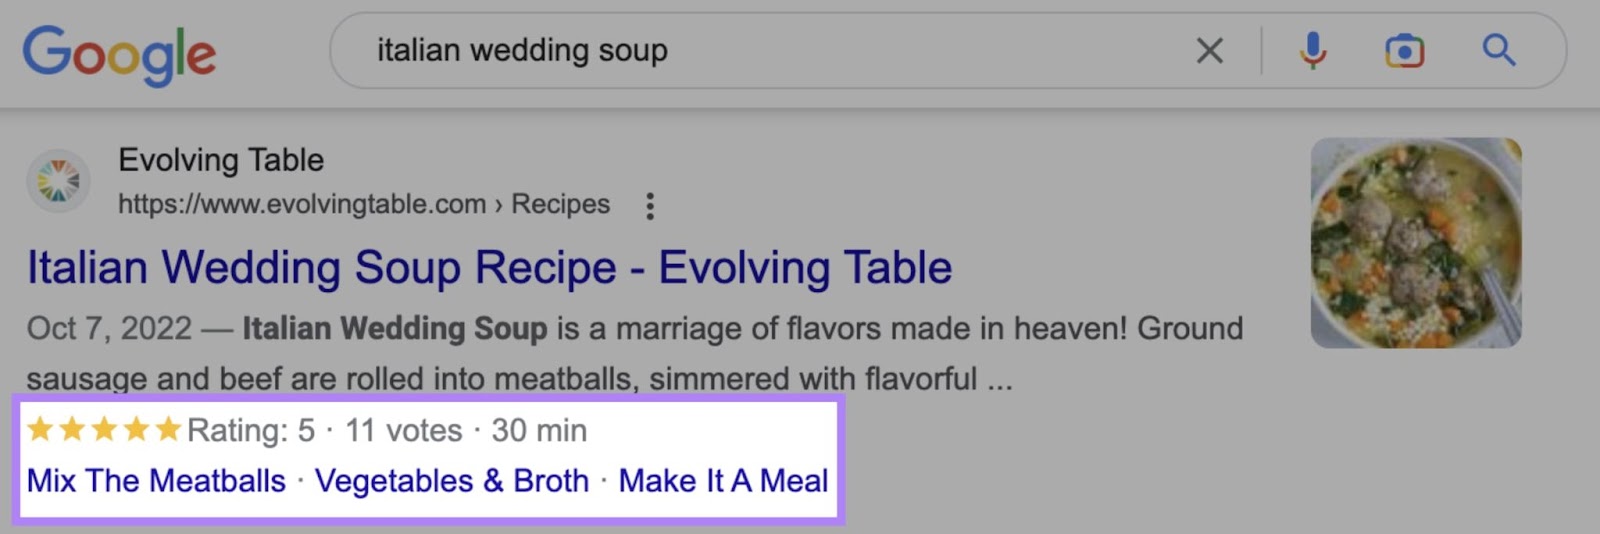 Google search result for "italian wedding soup" showing inline sitelinks under the first listing.